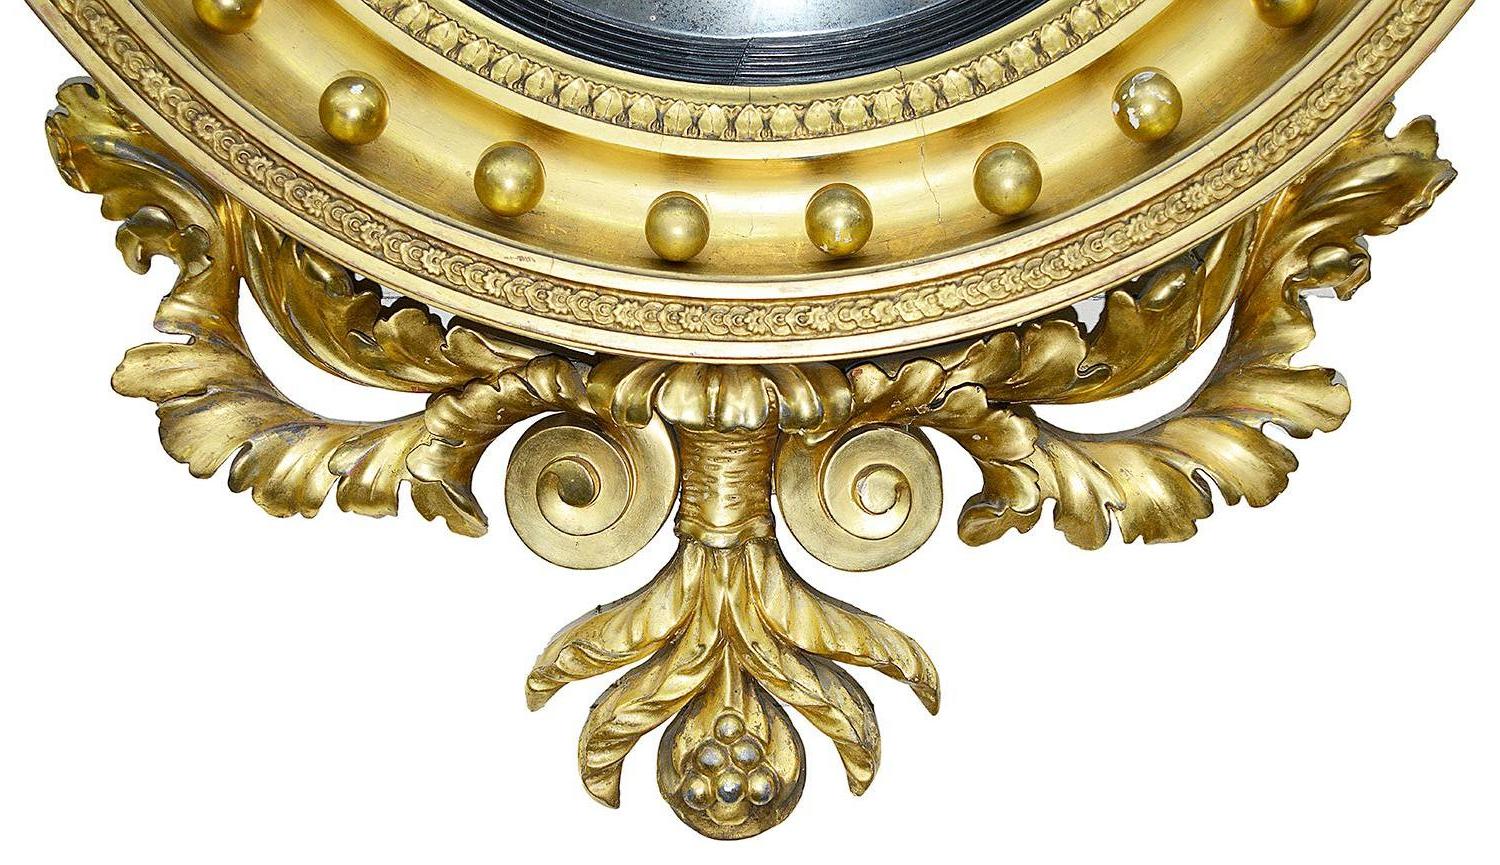 A large and impressive early 19th century Regency period gilded convex wall mirror, having a carved giltwood eagle above scrolling leaves and cornucopia, an ebonised slip around the convex mirror, gilded balls and carved foliate decoration to the